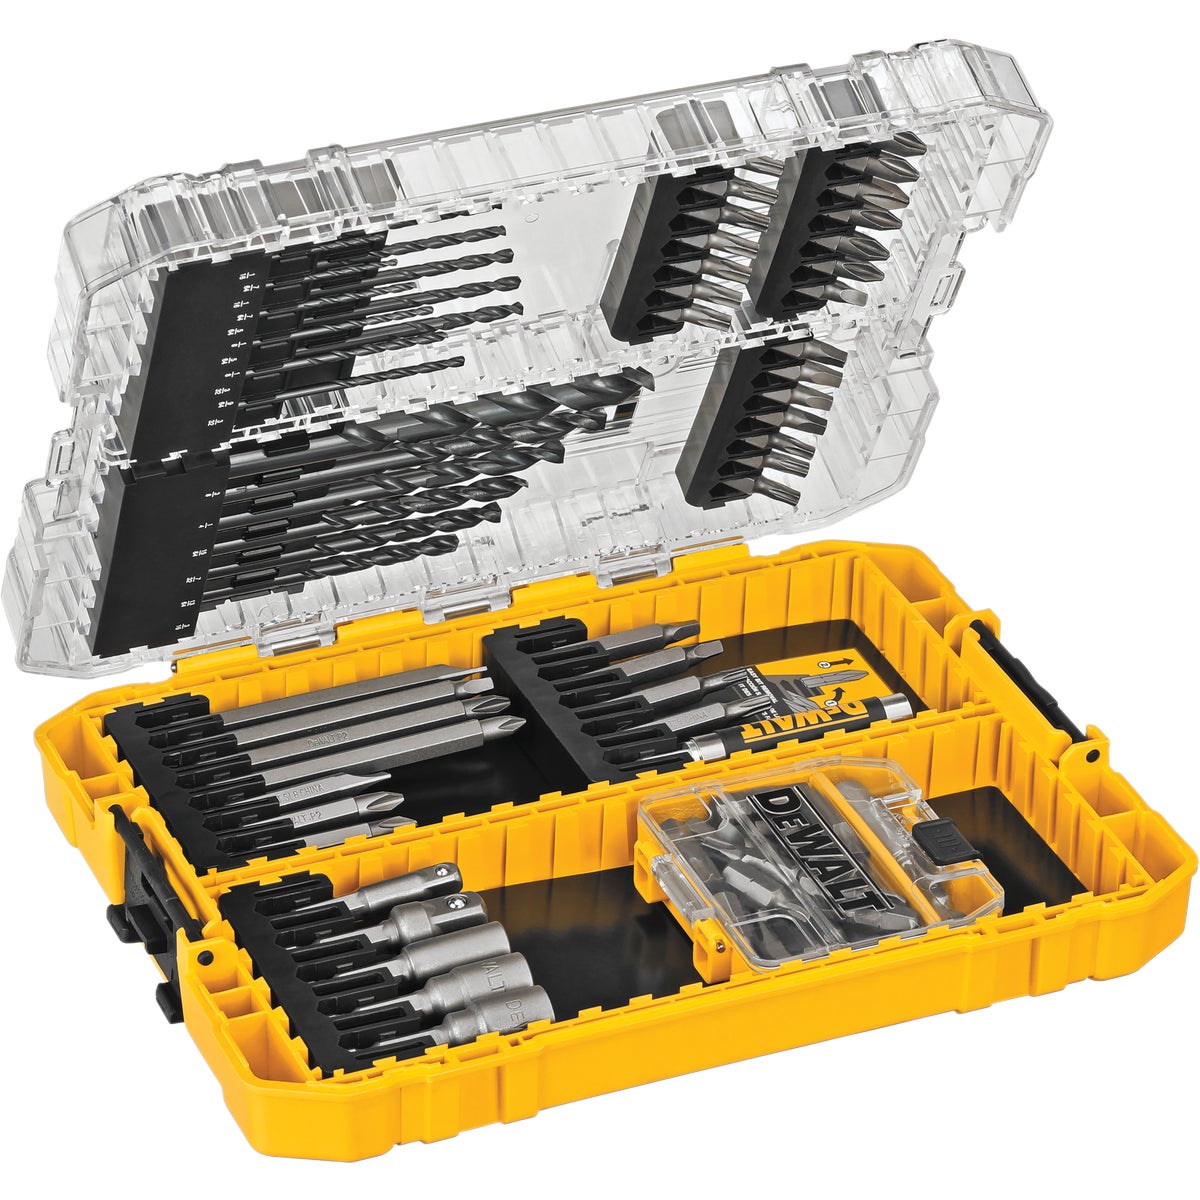 Item 362832, Set contains all common screwdriver bit sizes, most common drill bit 